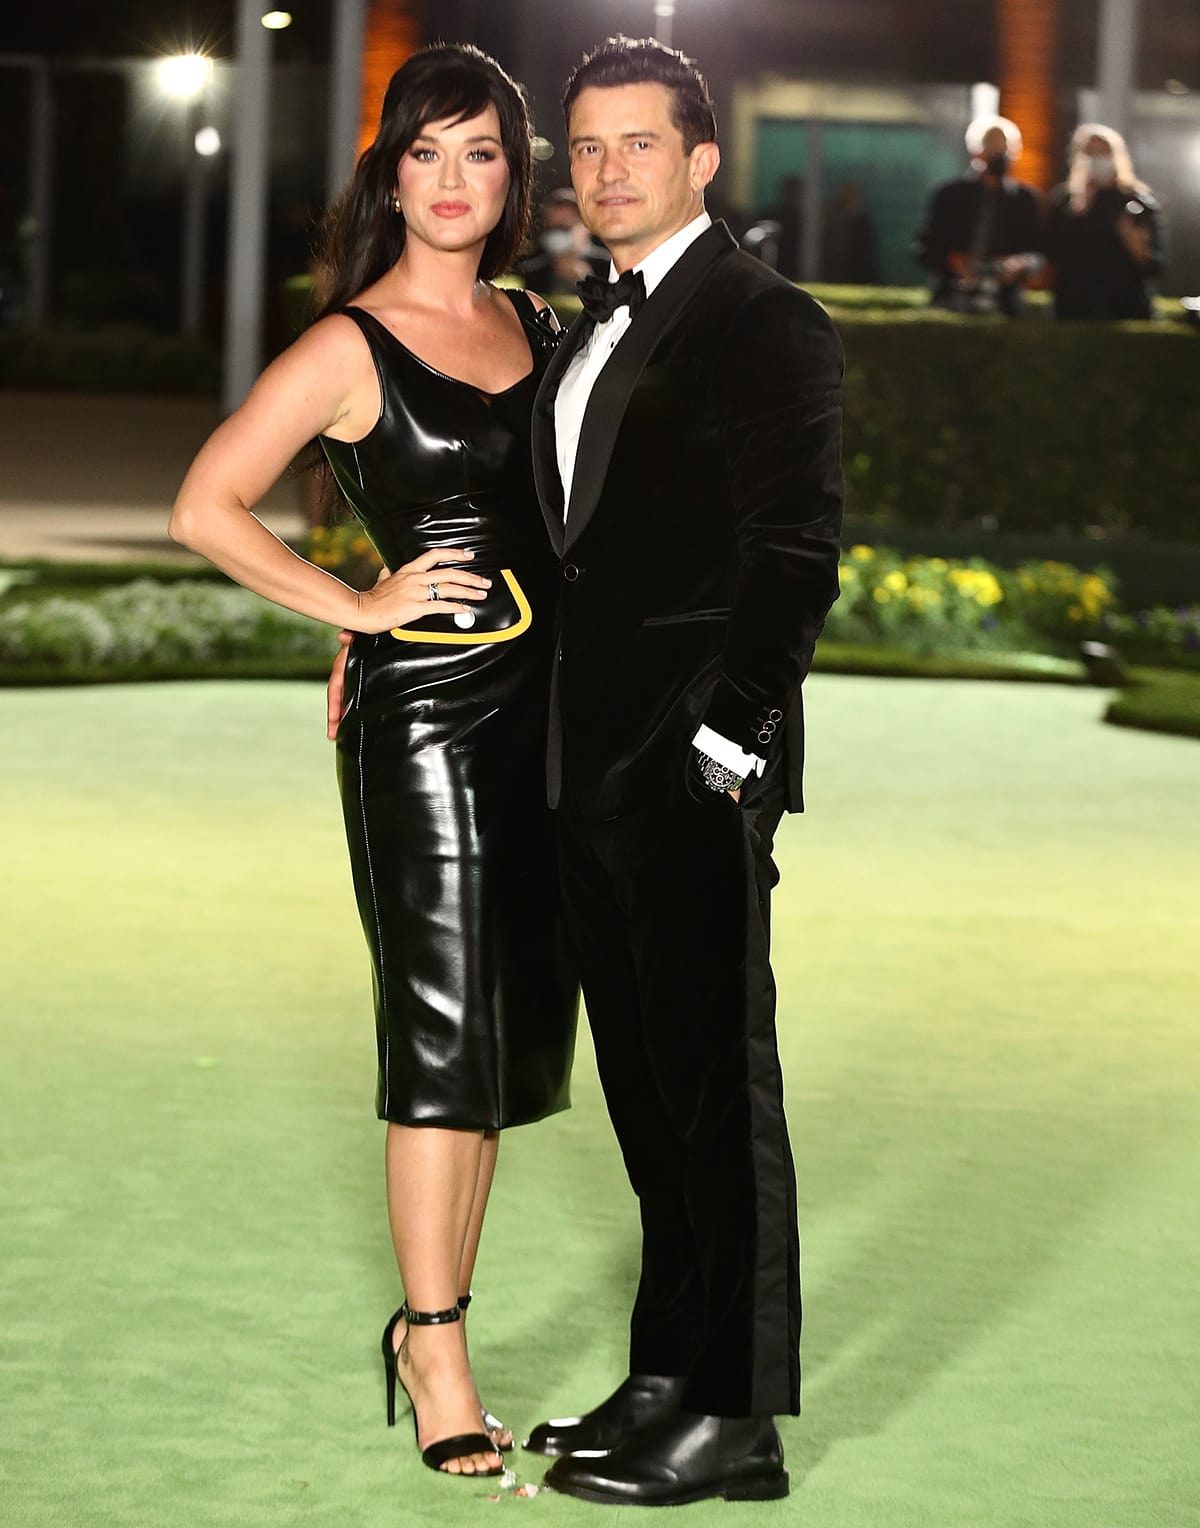 Katy Perry and Orlando Bloom at the opening of The Academy Museum of Motion Pictures on September 26, 2021